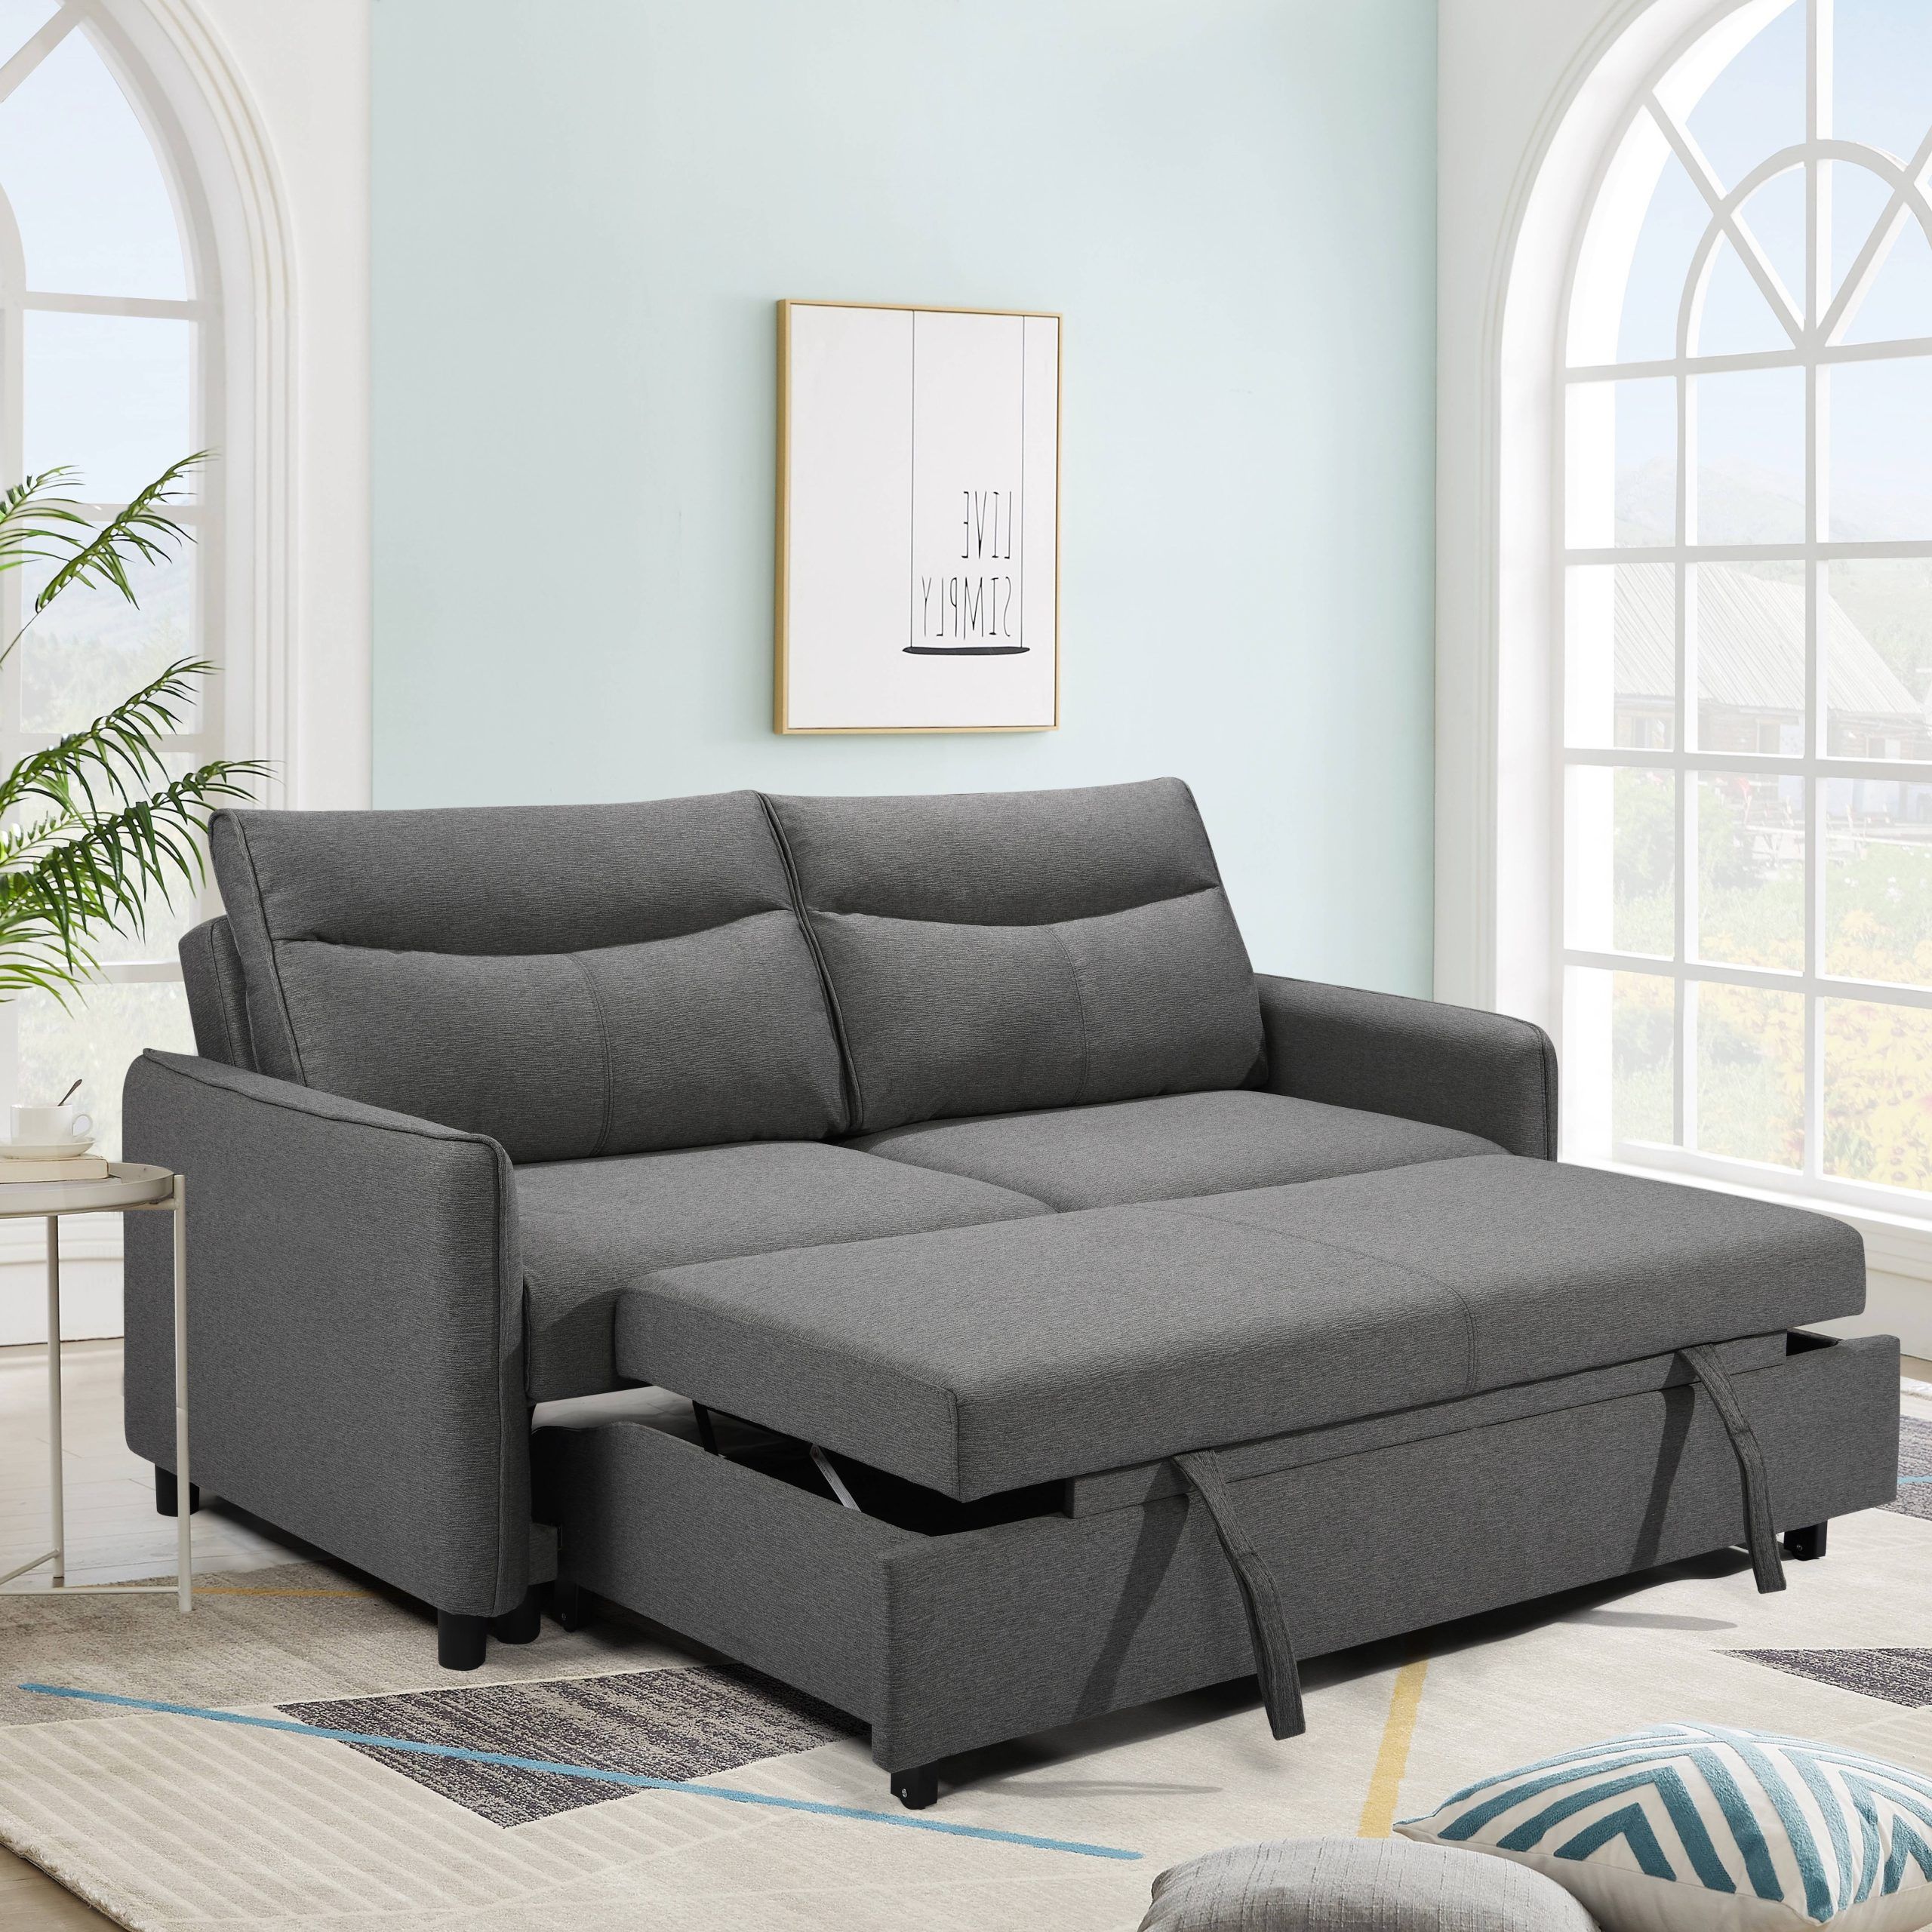 3 In 1 Convertible Sleeper Sofa Bed, Modern Velvet Loveseat Futon Sofa Couch  With Pullout Bed, Small Love Seat Lounge Sofa With Reclining Backrest,toss  Pillows, Pockets, Furniture For Living Room,gray – Walmart Pertaining To 3 In 1 Gray Pull Out Sleeper Sofas (Photo 8 of 15)